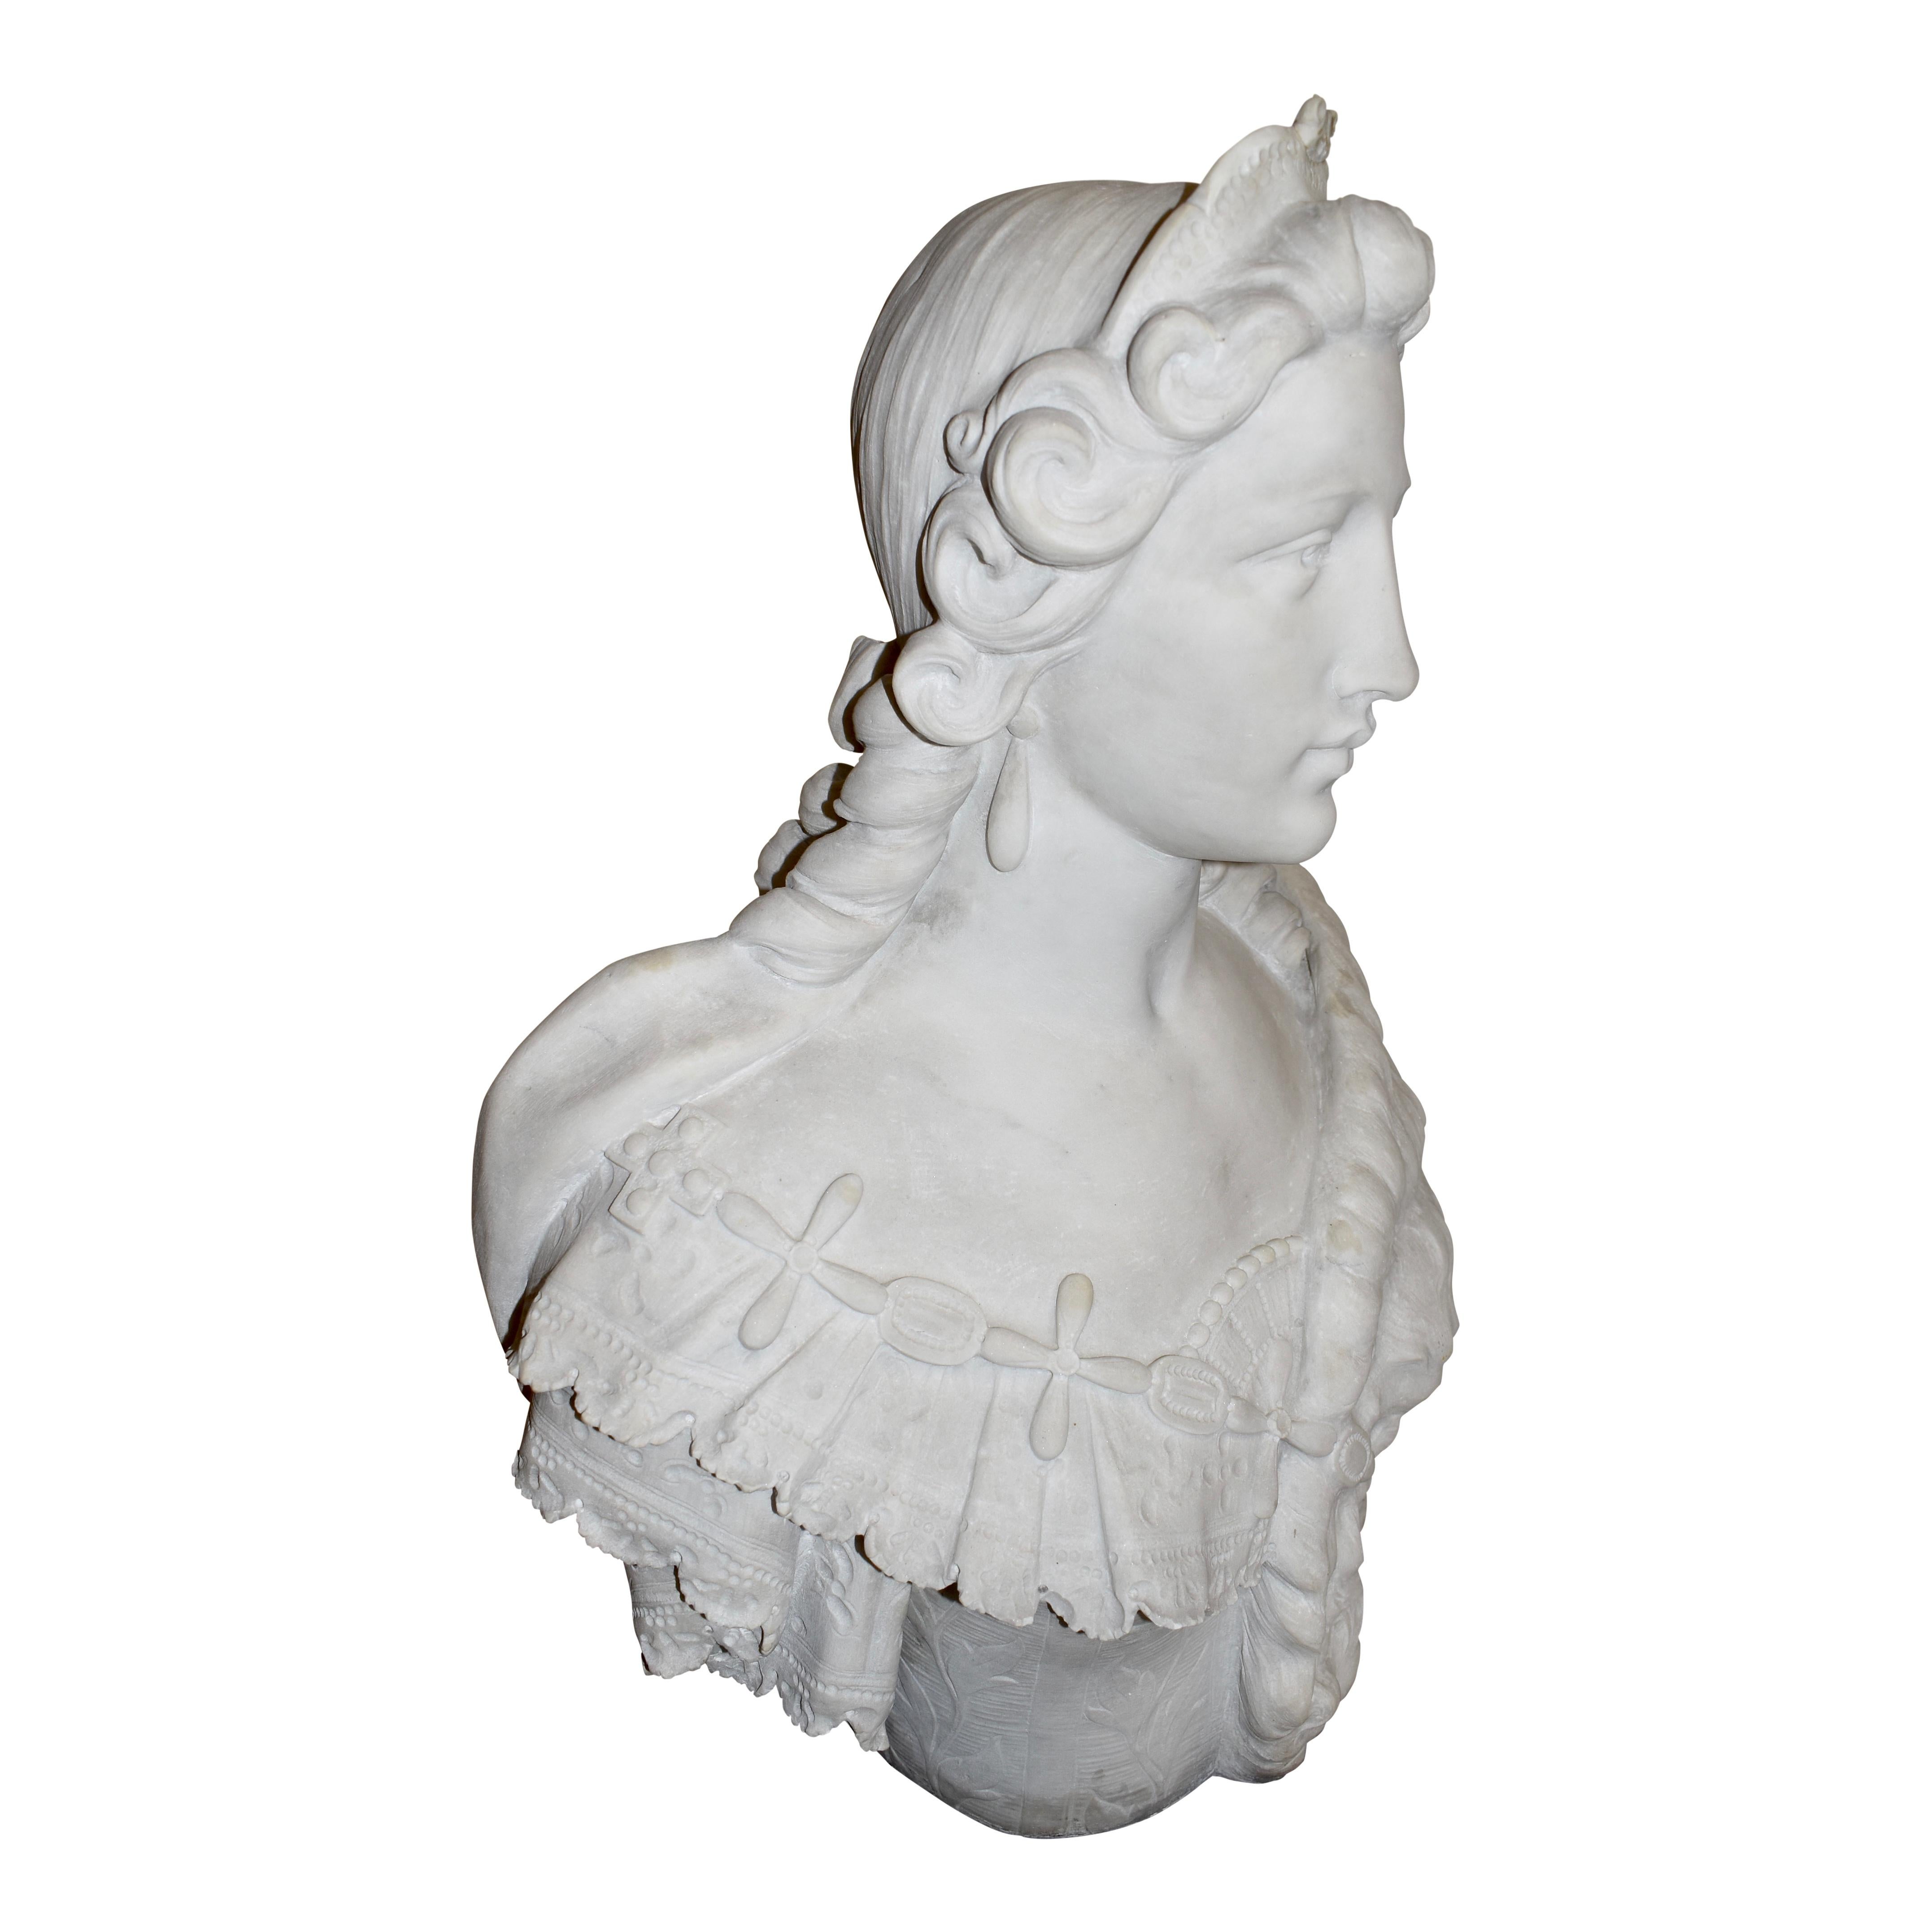 As an early rendition of Marie Antoinette, Queen of France, this marble bust depicts her in her youth wearing a simple hairstyle with ringlets tied back in a bow and a small tiara crowning her head. A fur drapes elegantly over her left shoulder,